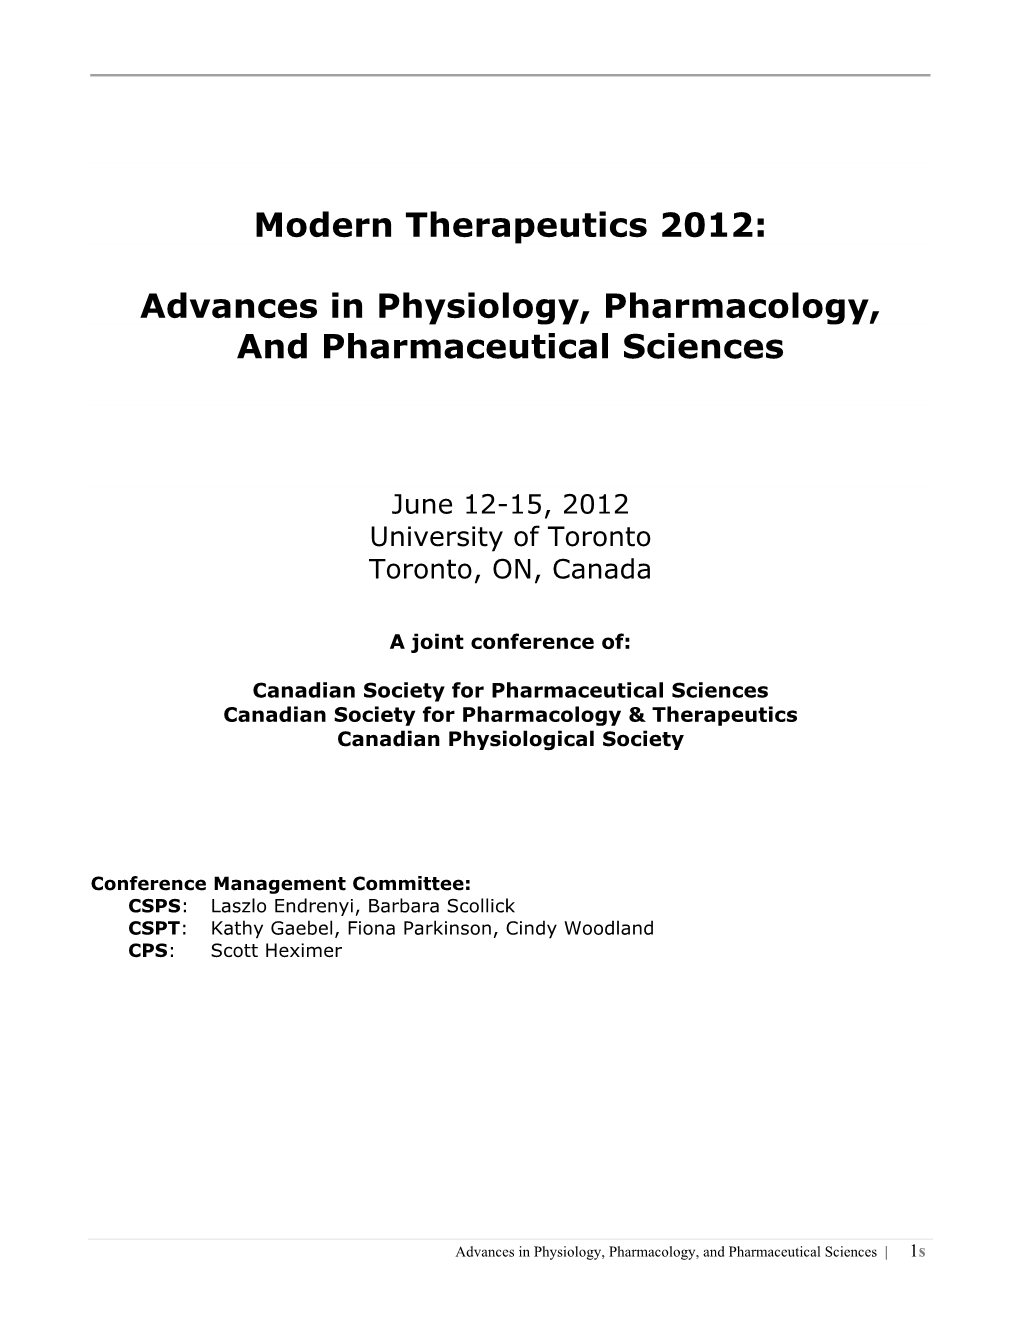 Advances in Physiology, Pharmacology, and Pharmaceutical Sciences